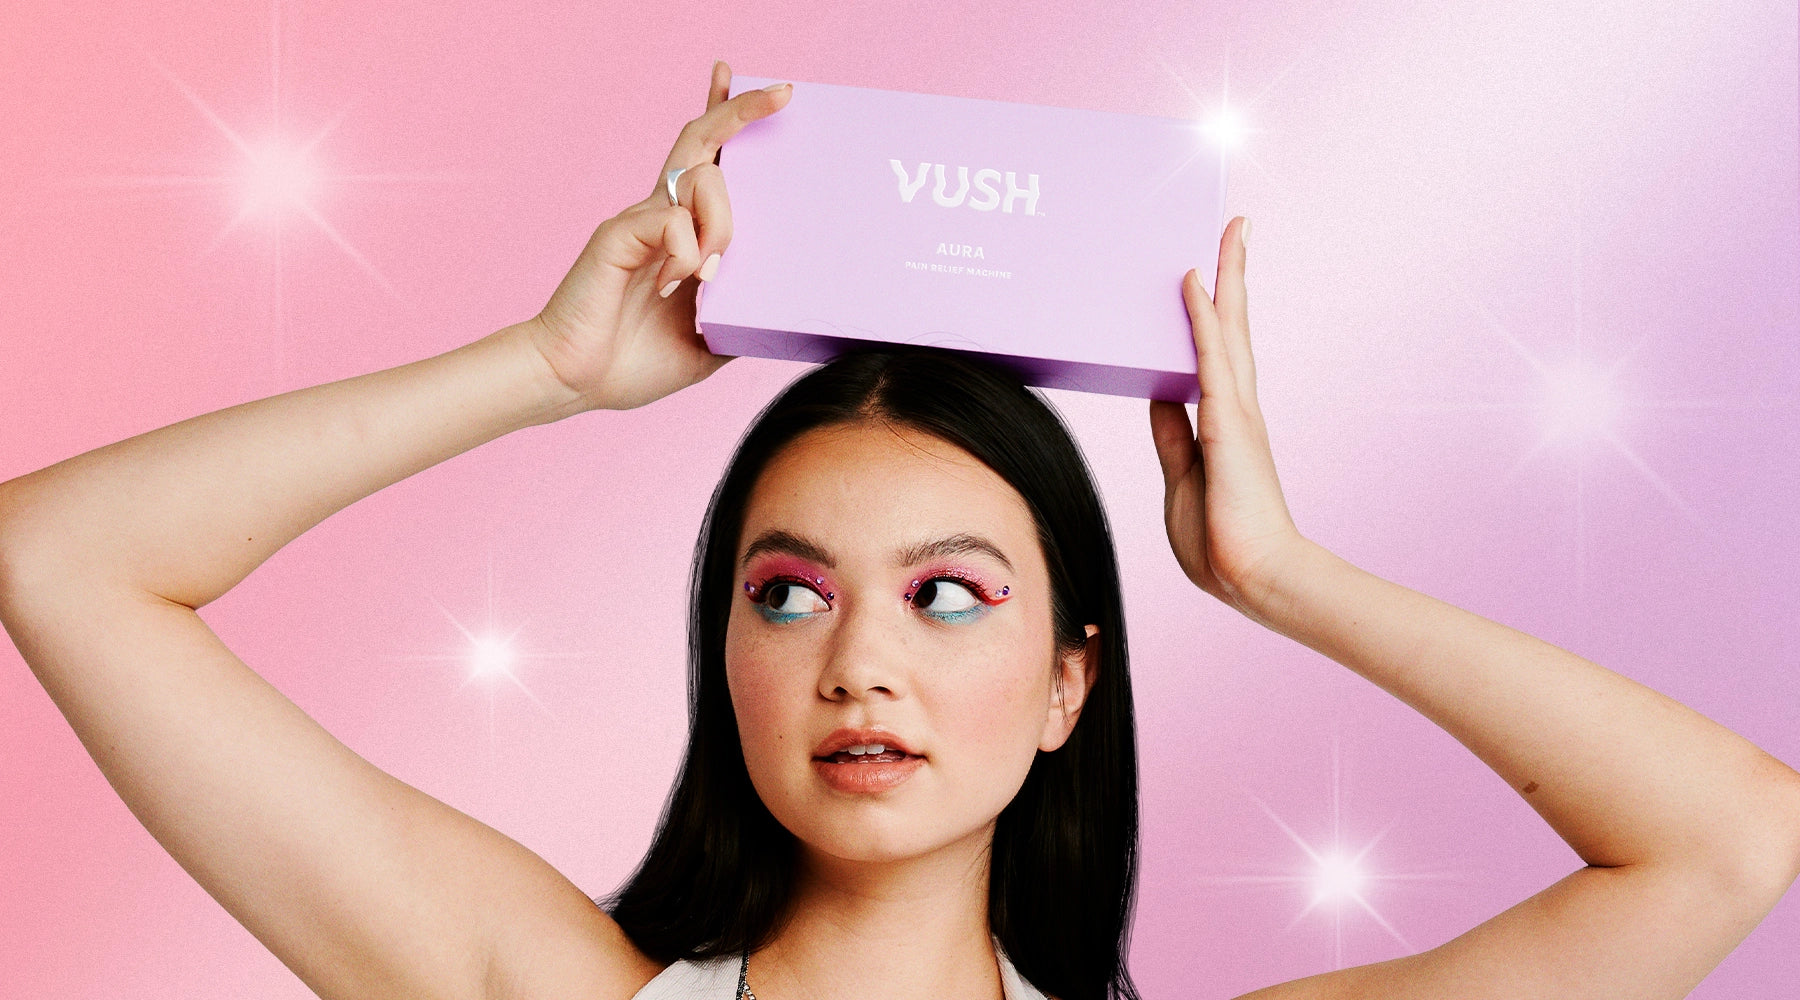 Young woman with long dark hair posing with VUSH purple Aura box above head against pink/purple background with sparkly white stars